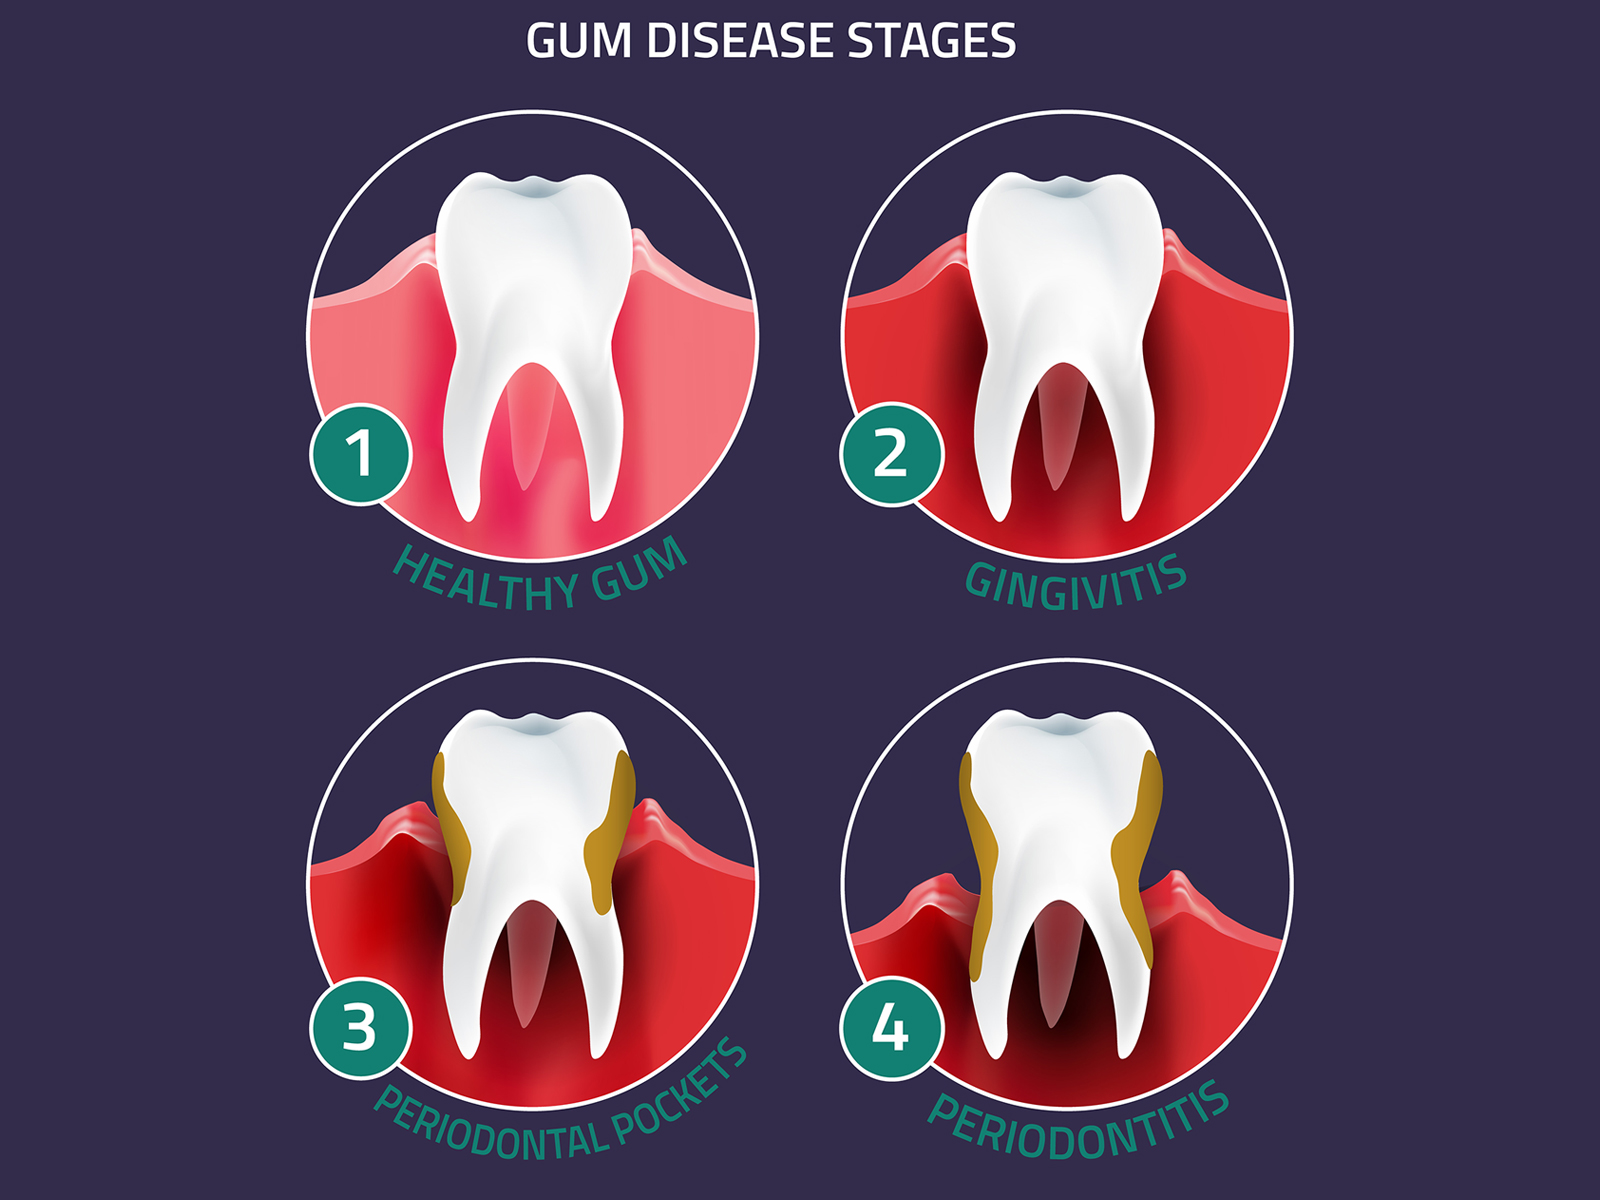 What are the 4 stages of gum disease?